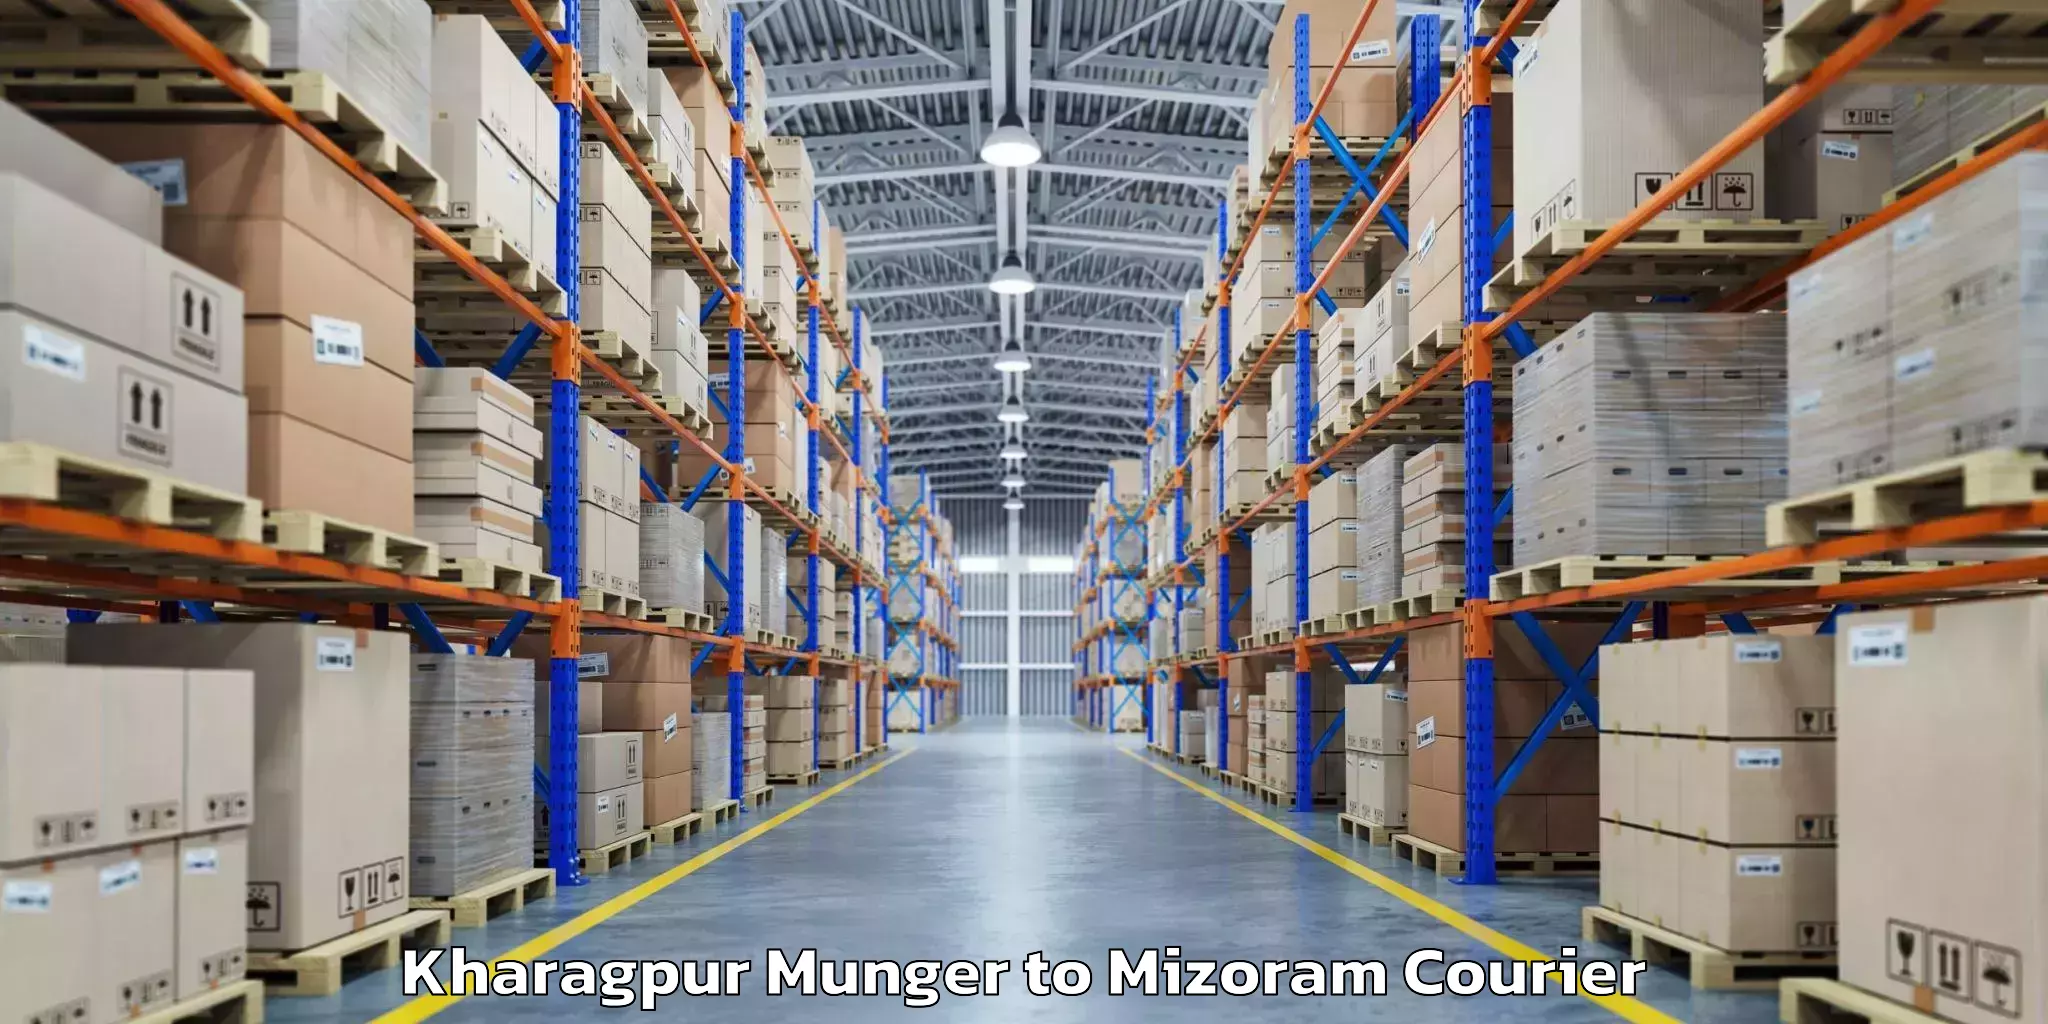 Luggage shipment specialists Kharagpur Munger to Siaha